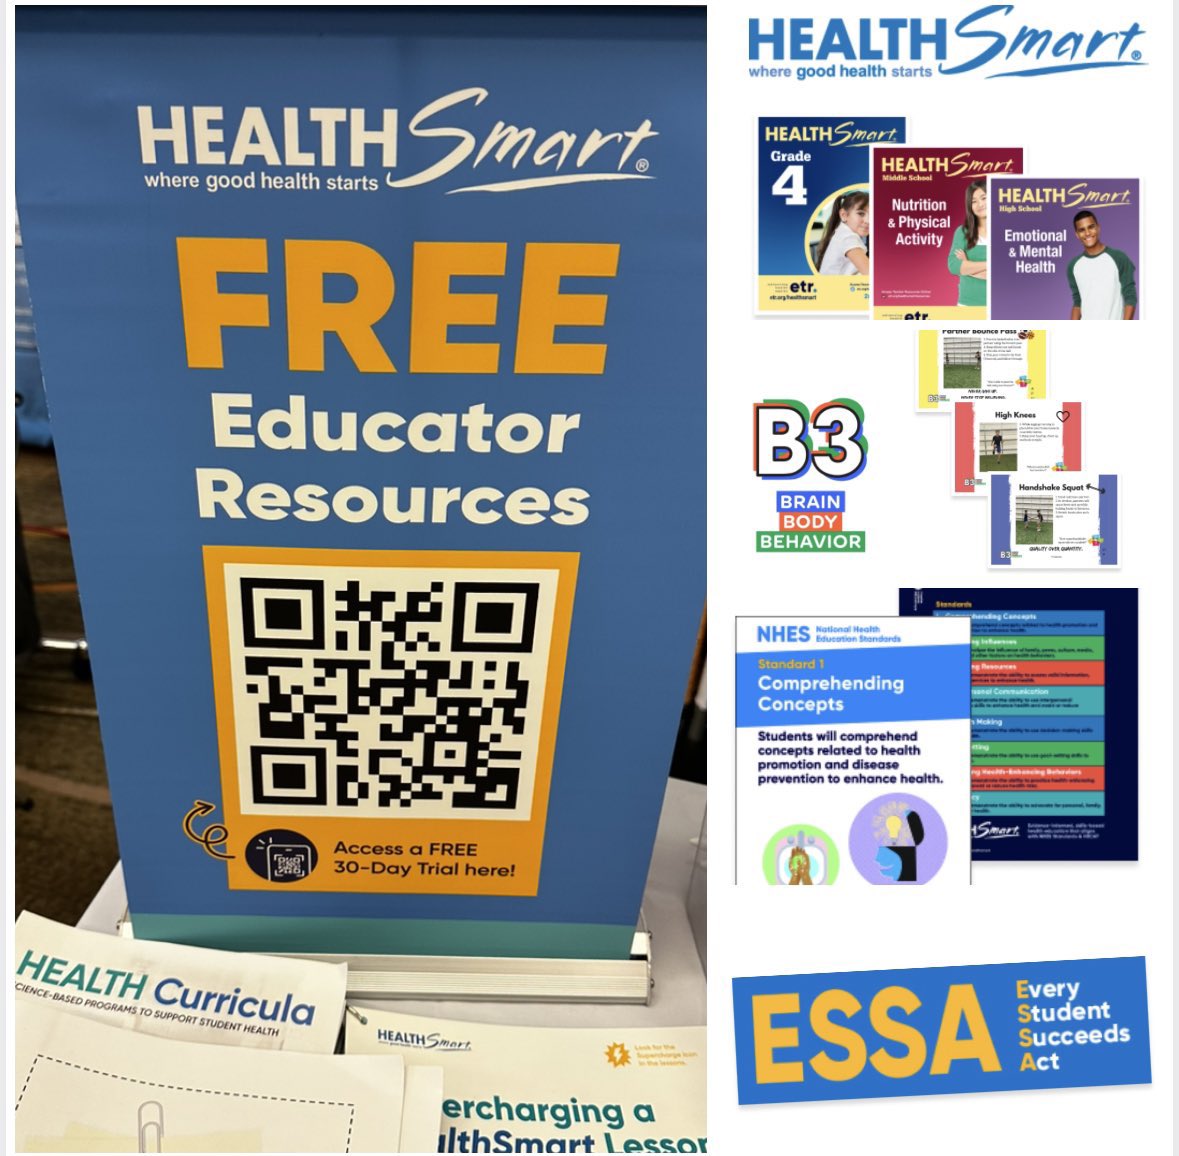 Hey #texahperd, like free stuff? Check out all these FREE resources and samples to take back to your school! Scan the QR code or use the direct link below to complete the quick and easy form: share.hsforms.com/1HhrXaf-VQ6utk…